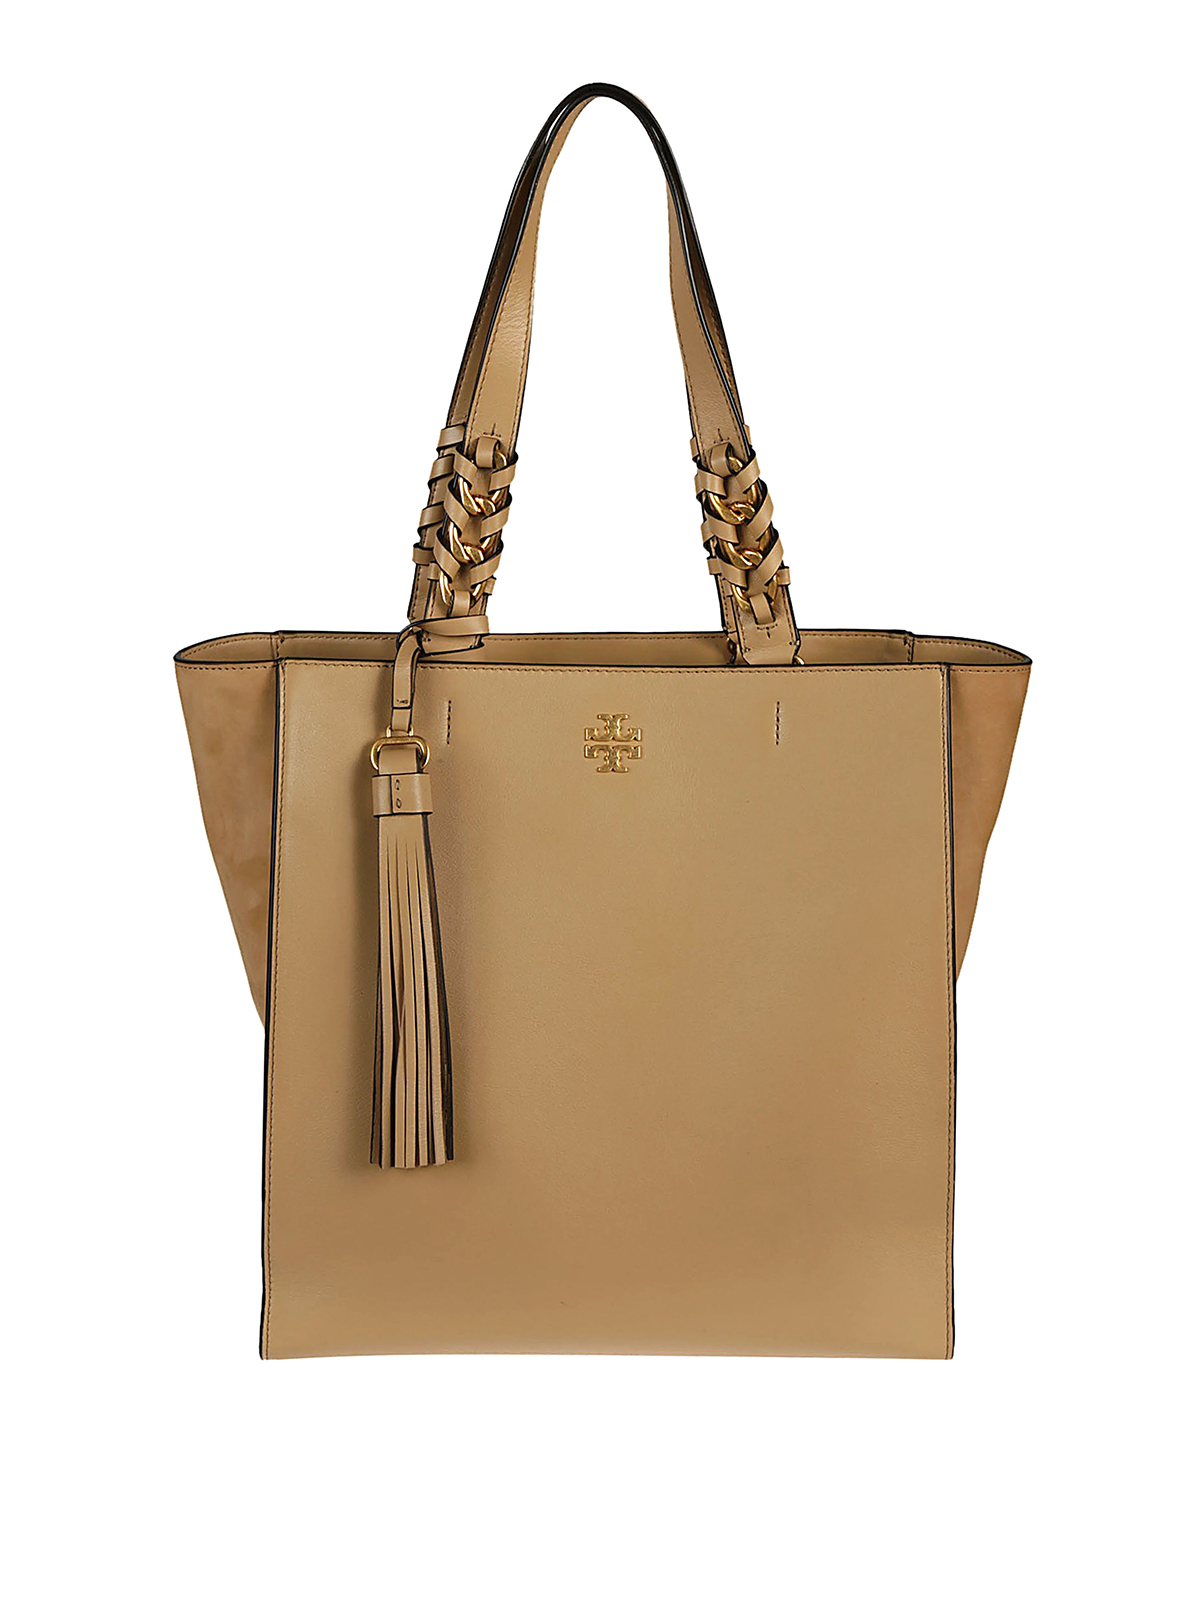 Totes bags Tory Burch - Brooke N/S leather N/S tote - 43716255 